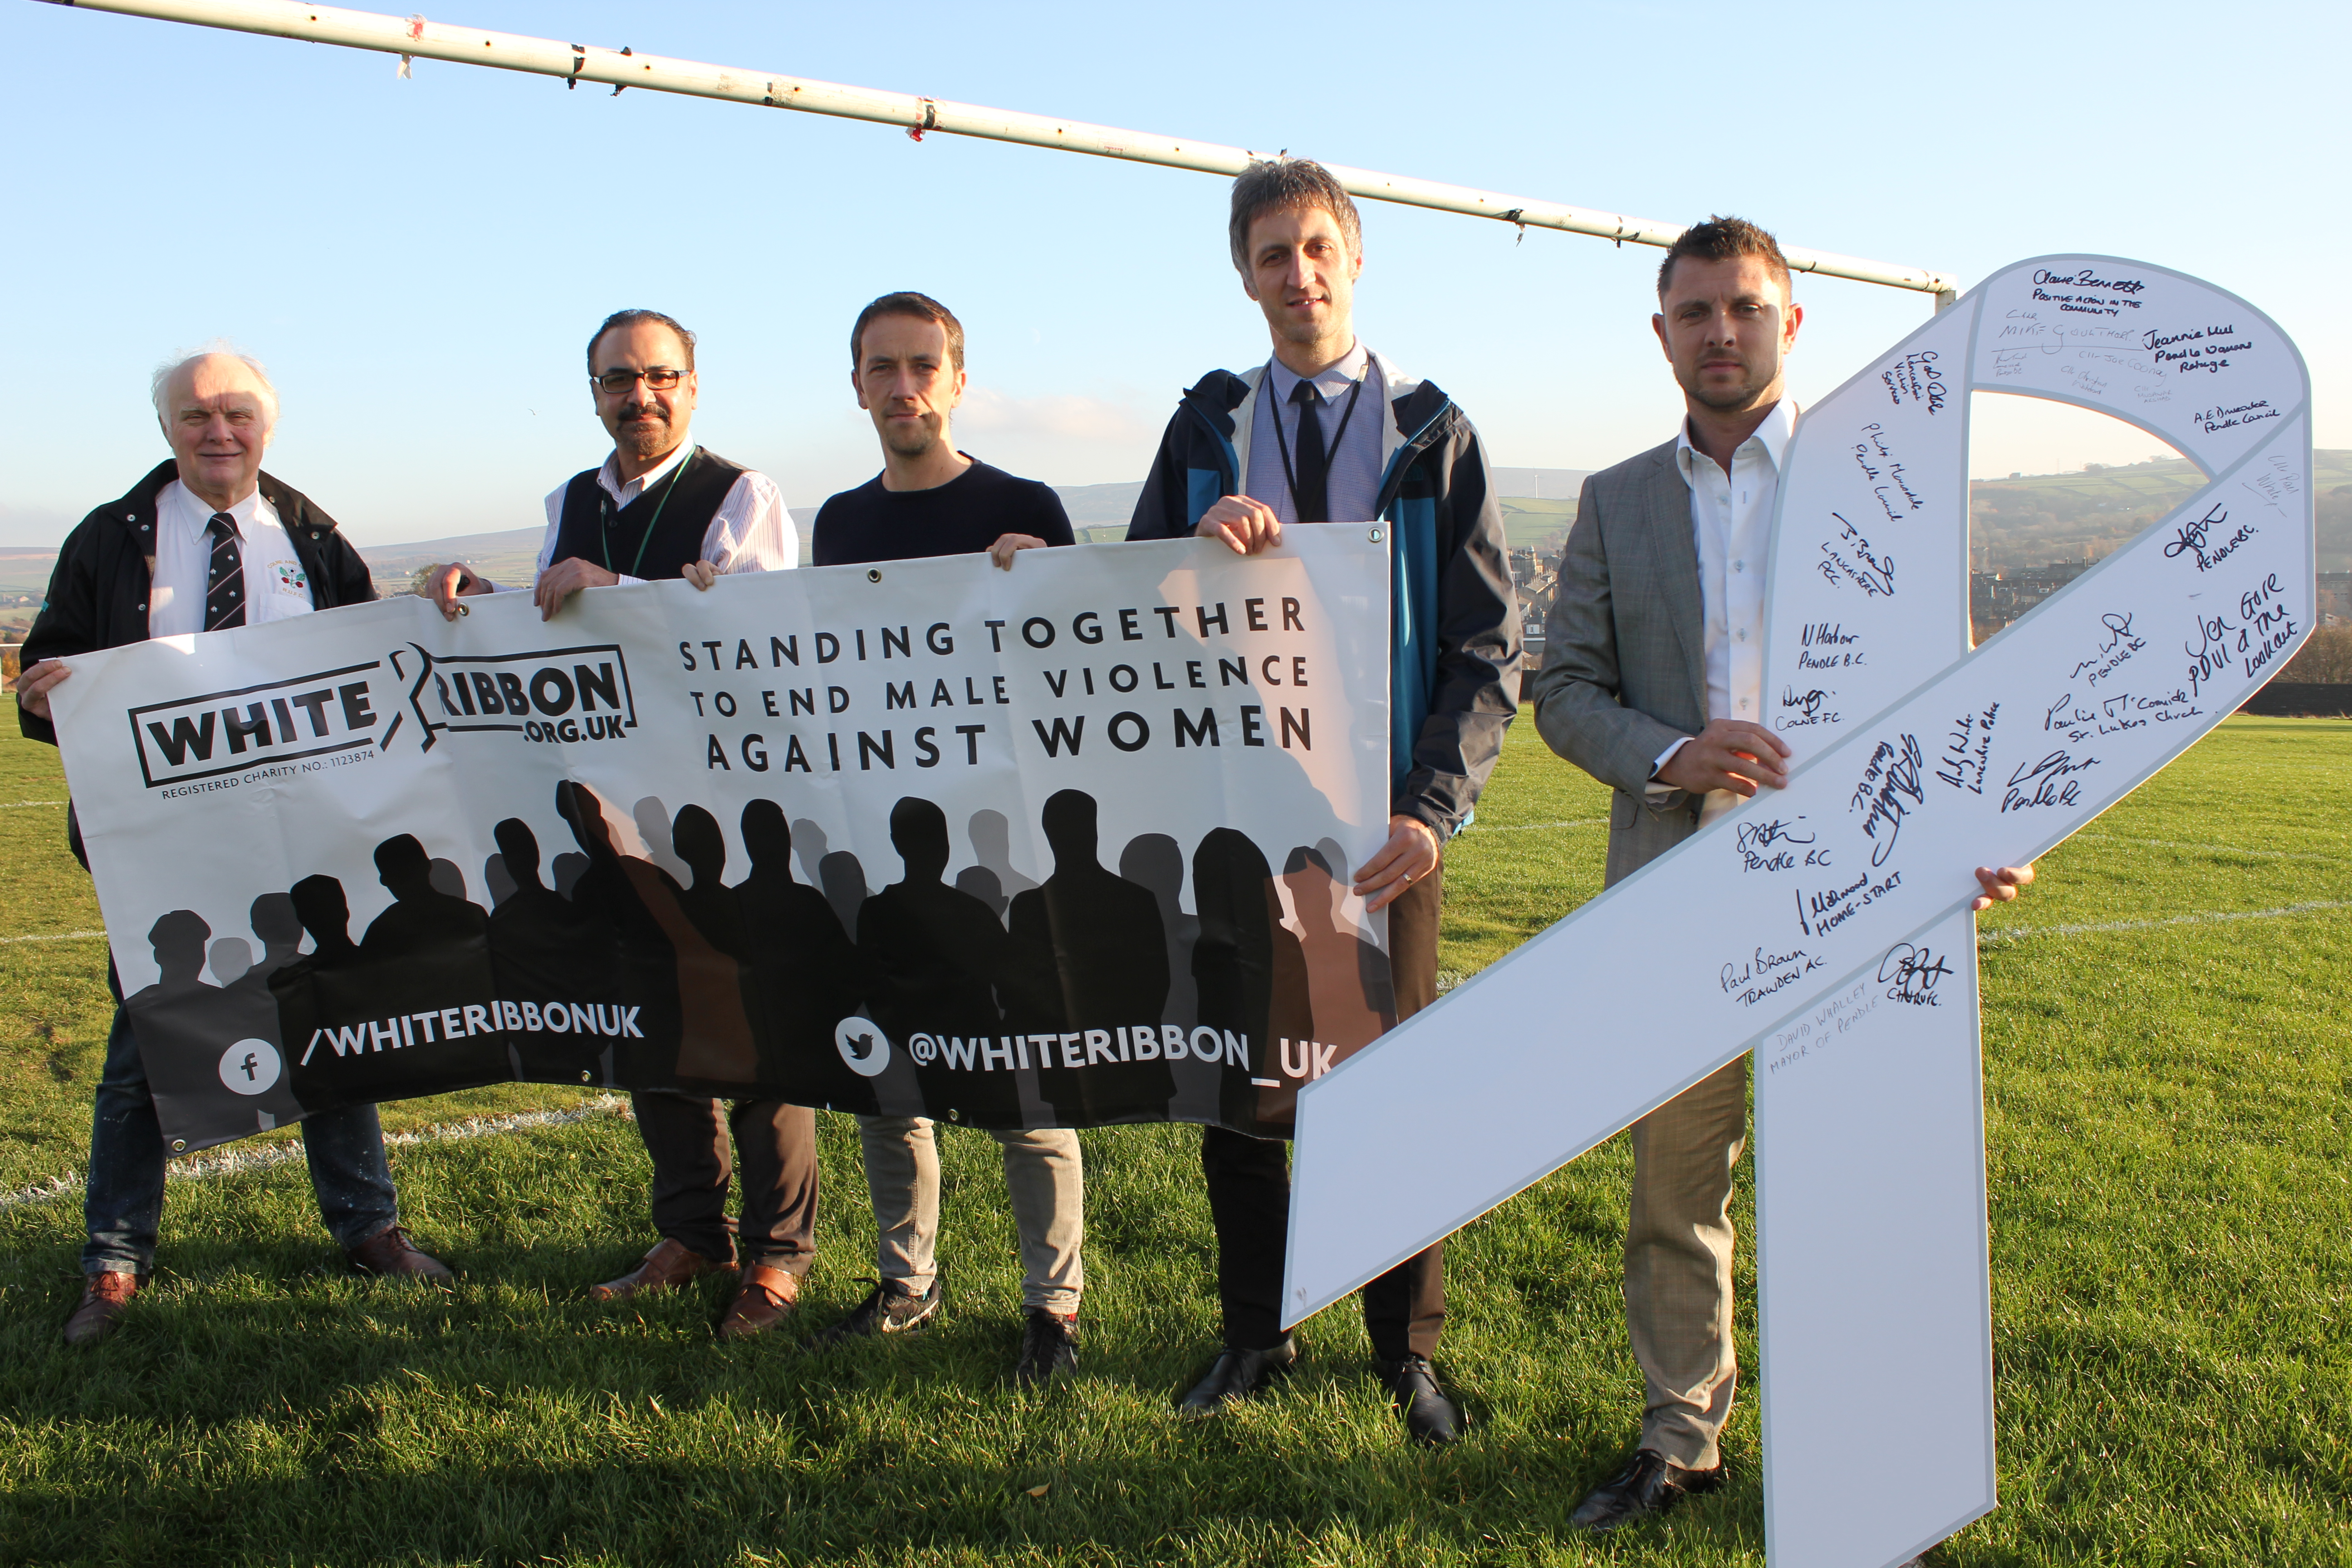 News story on how Pendle is supporting the White Ribbon campaign.